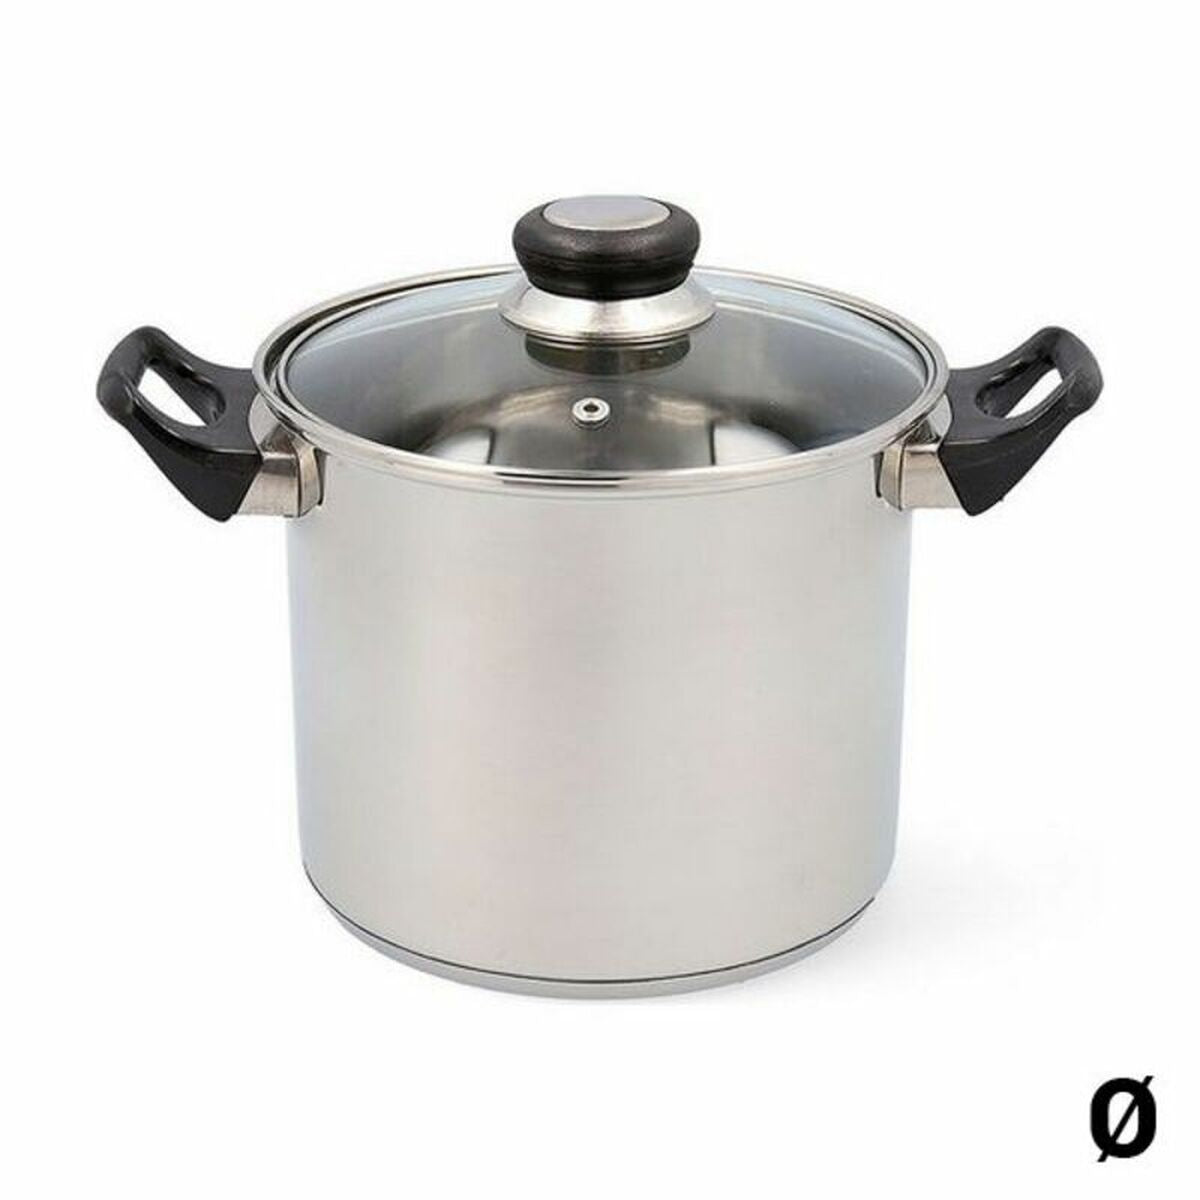 Pot with Glass Lid Quid Habitat Stainless steel